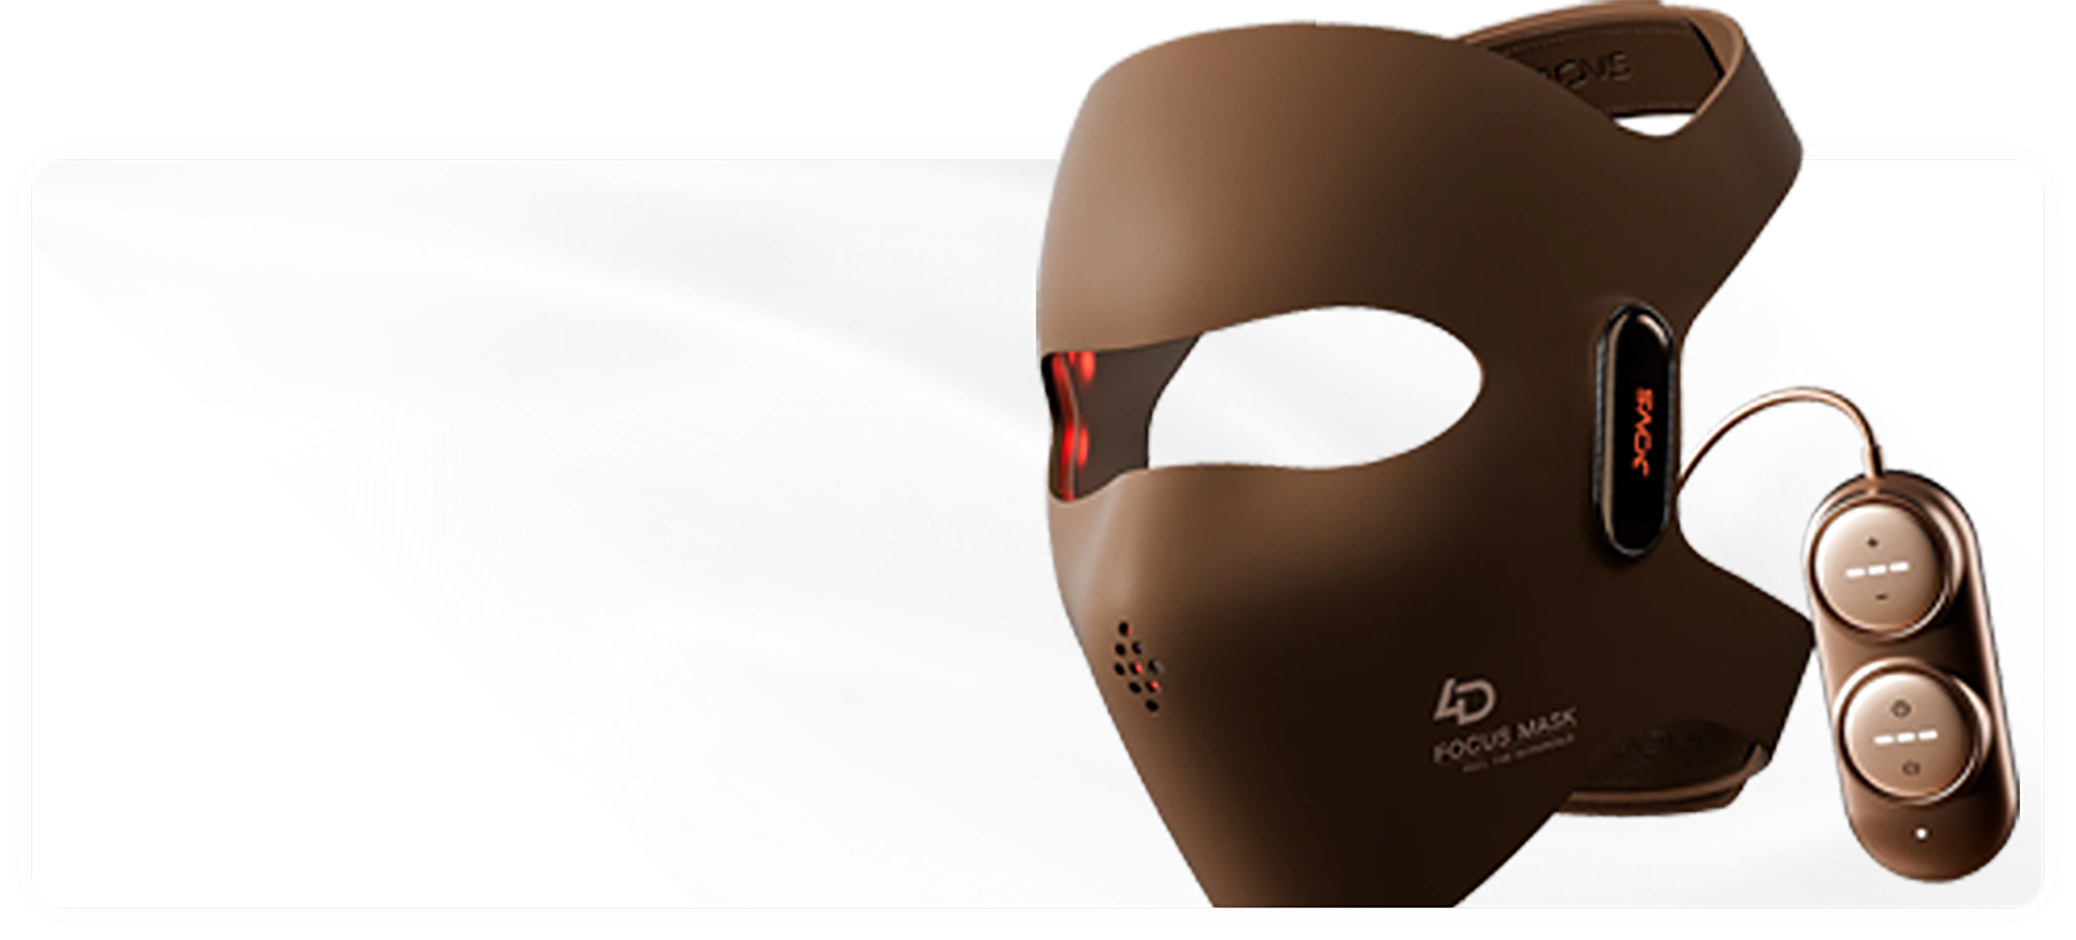 The JOVS 4D Laser Light Therapy Mask paired with a convenient controller, offering a high-tech, targeted treatment for skin rejuvenation and anti-aging.